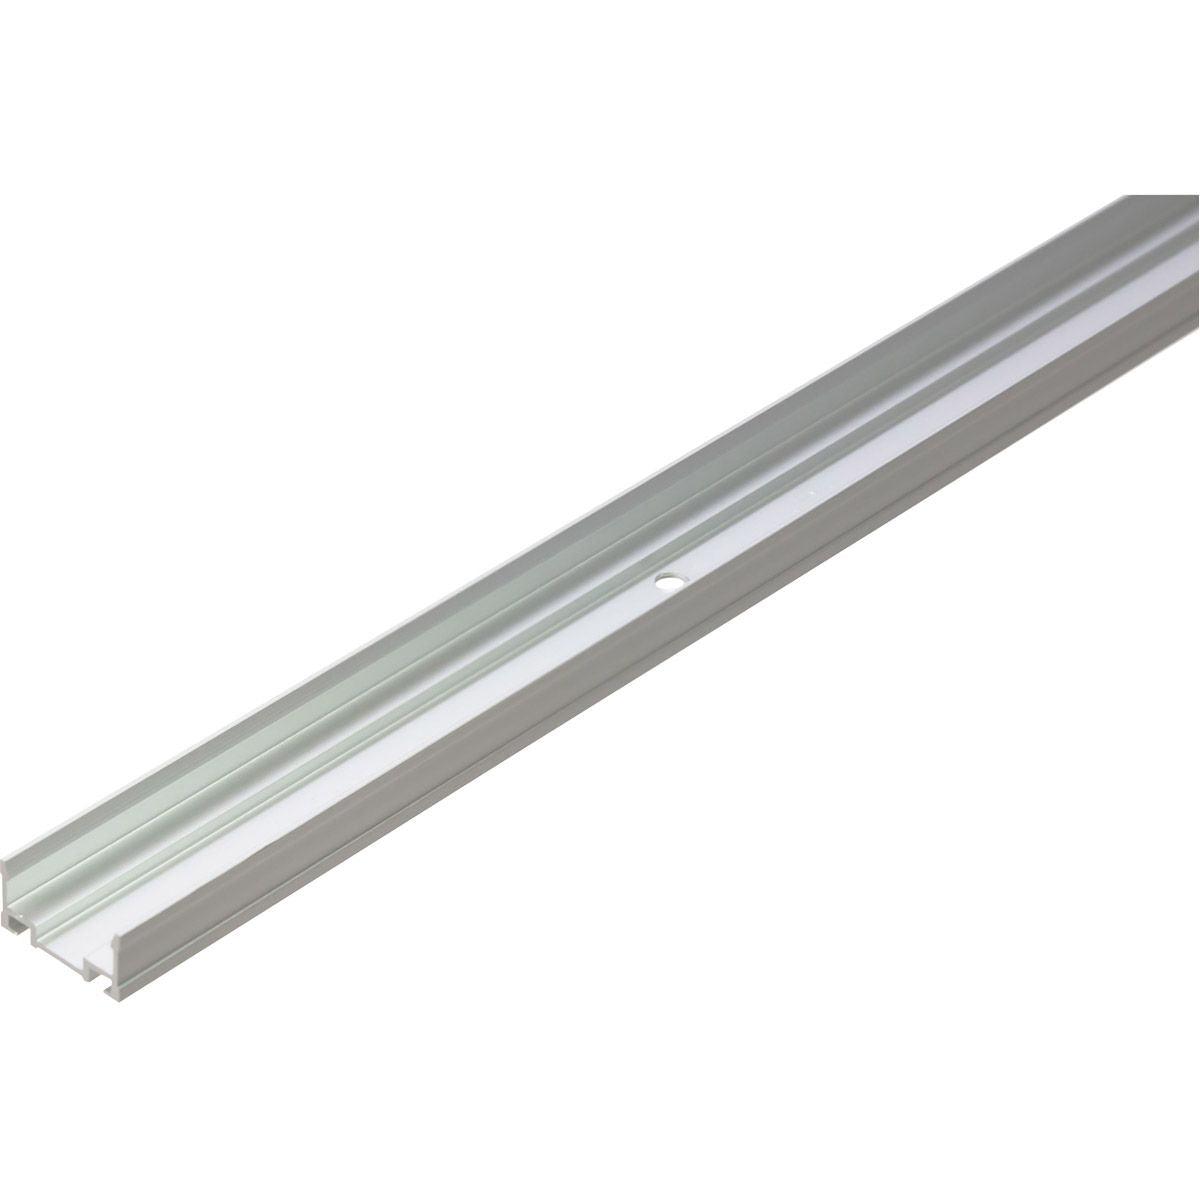 Hybrid 2 3ft Aluminum Mounting Channel, 10-Pack